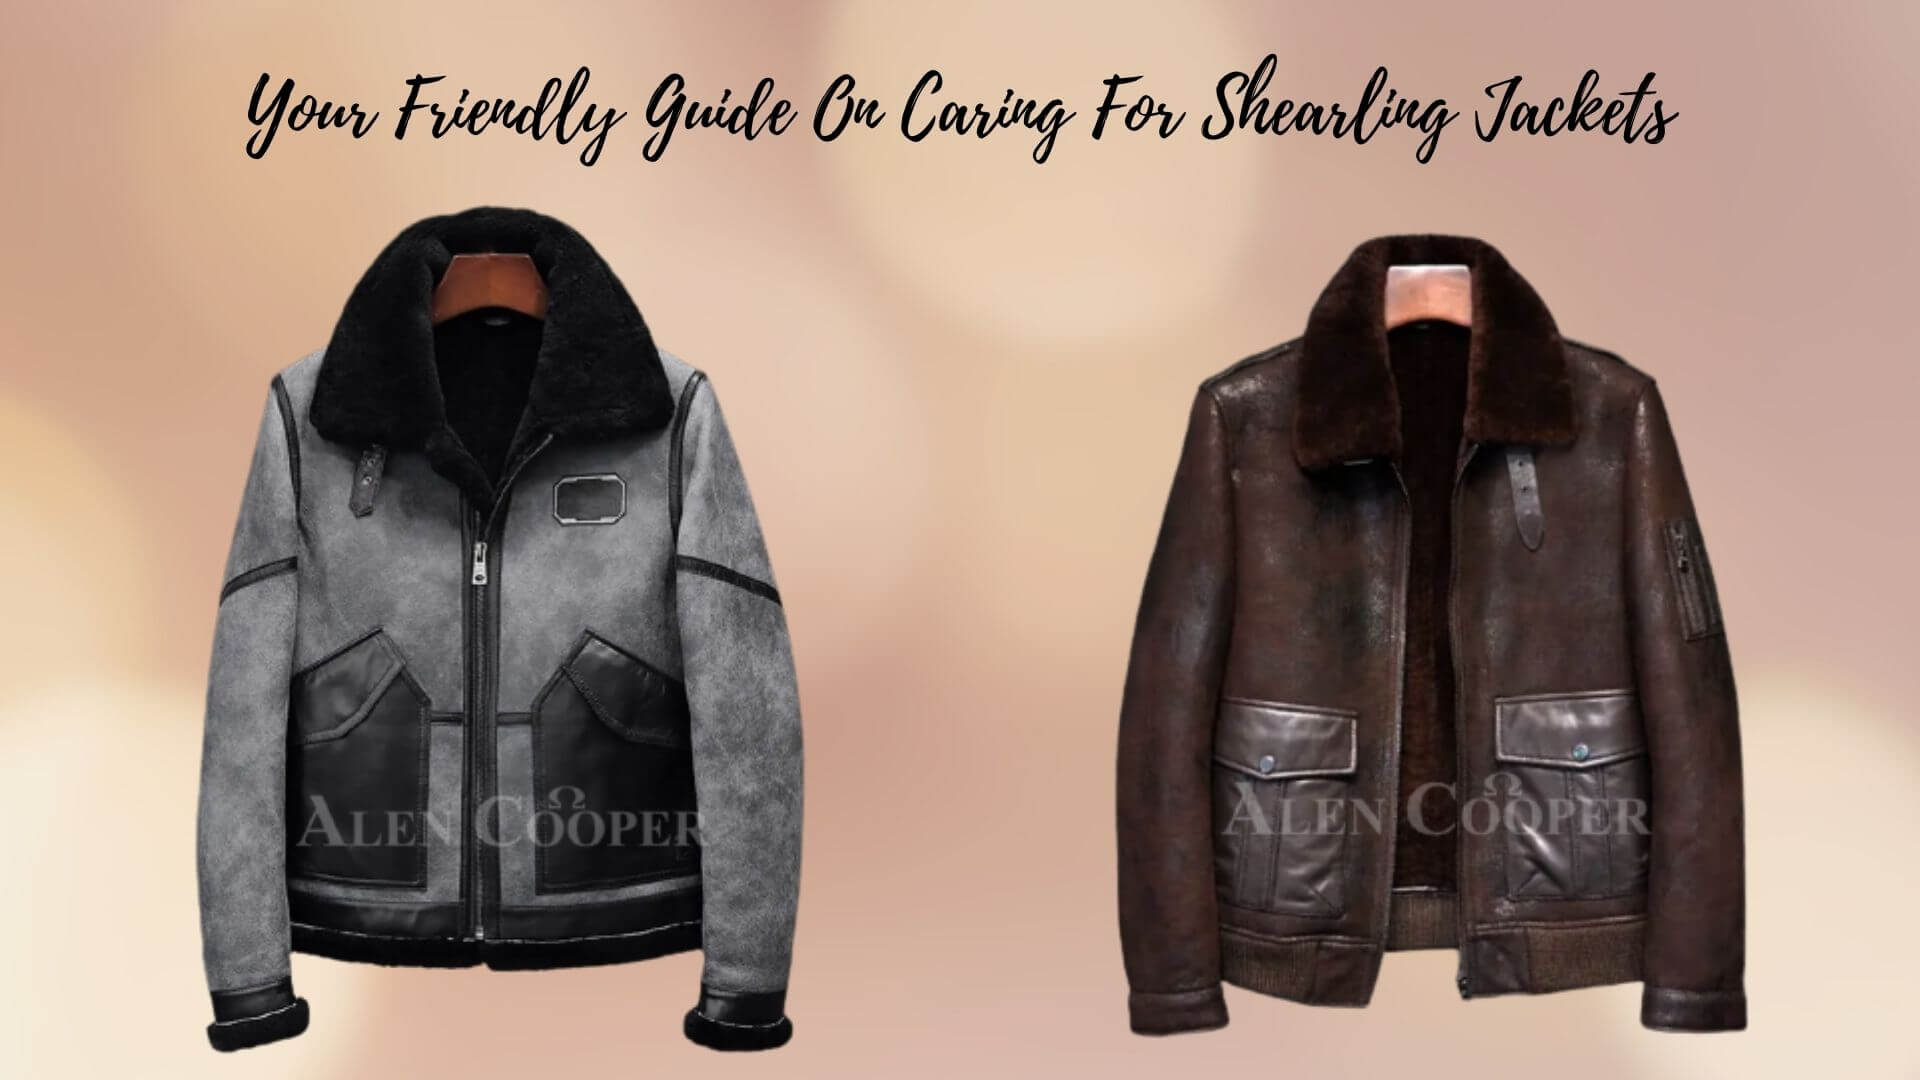 YOUR FRIENDLY GUIDE ON CARING FOR SHEARLING JACKETS